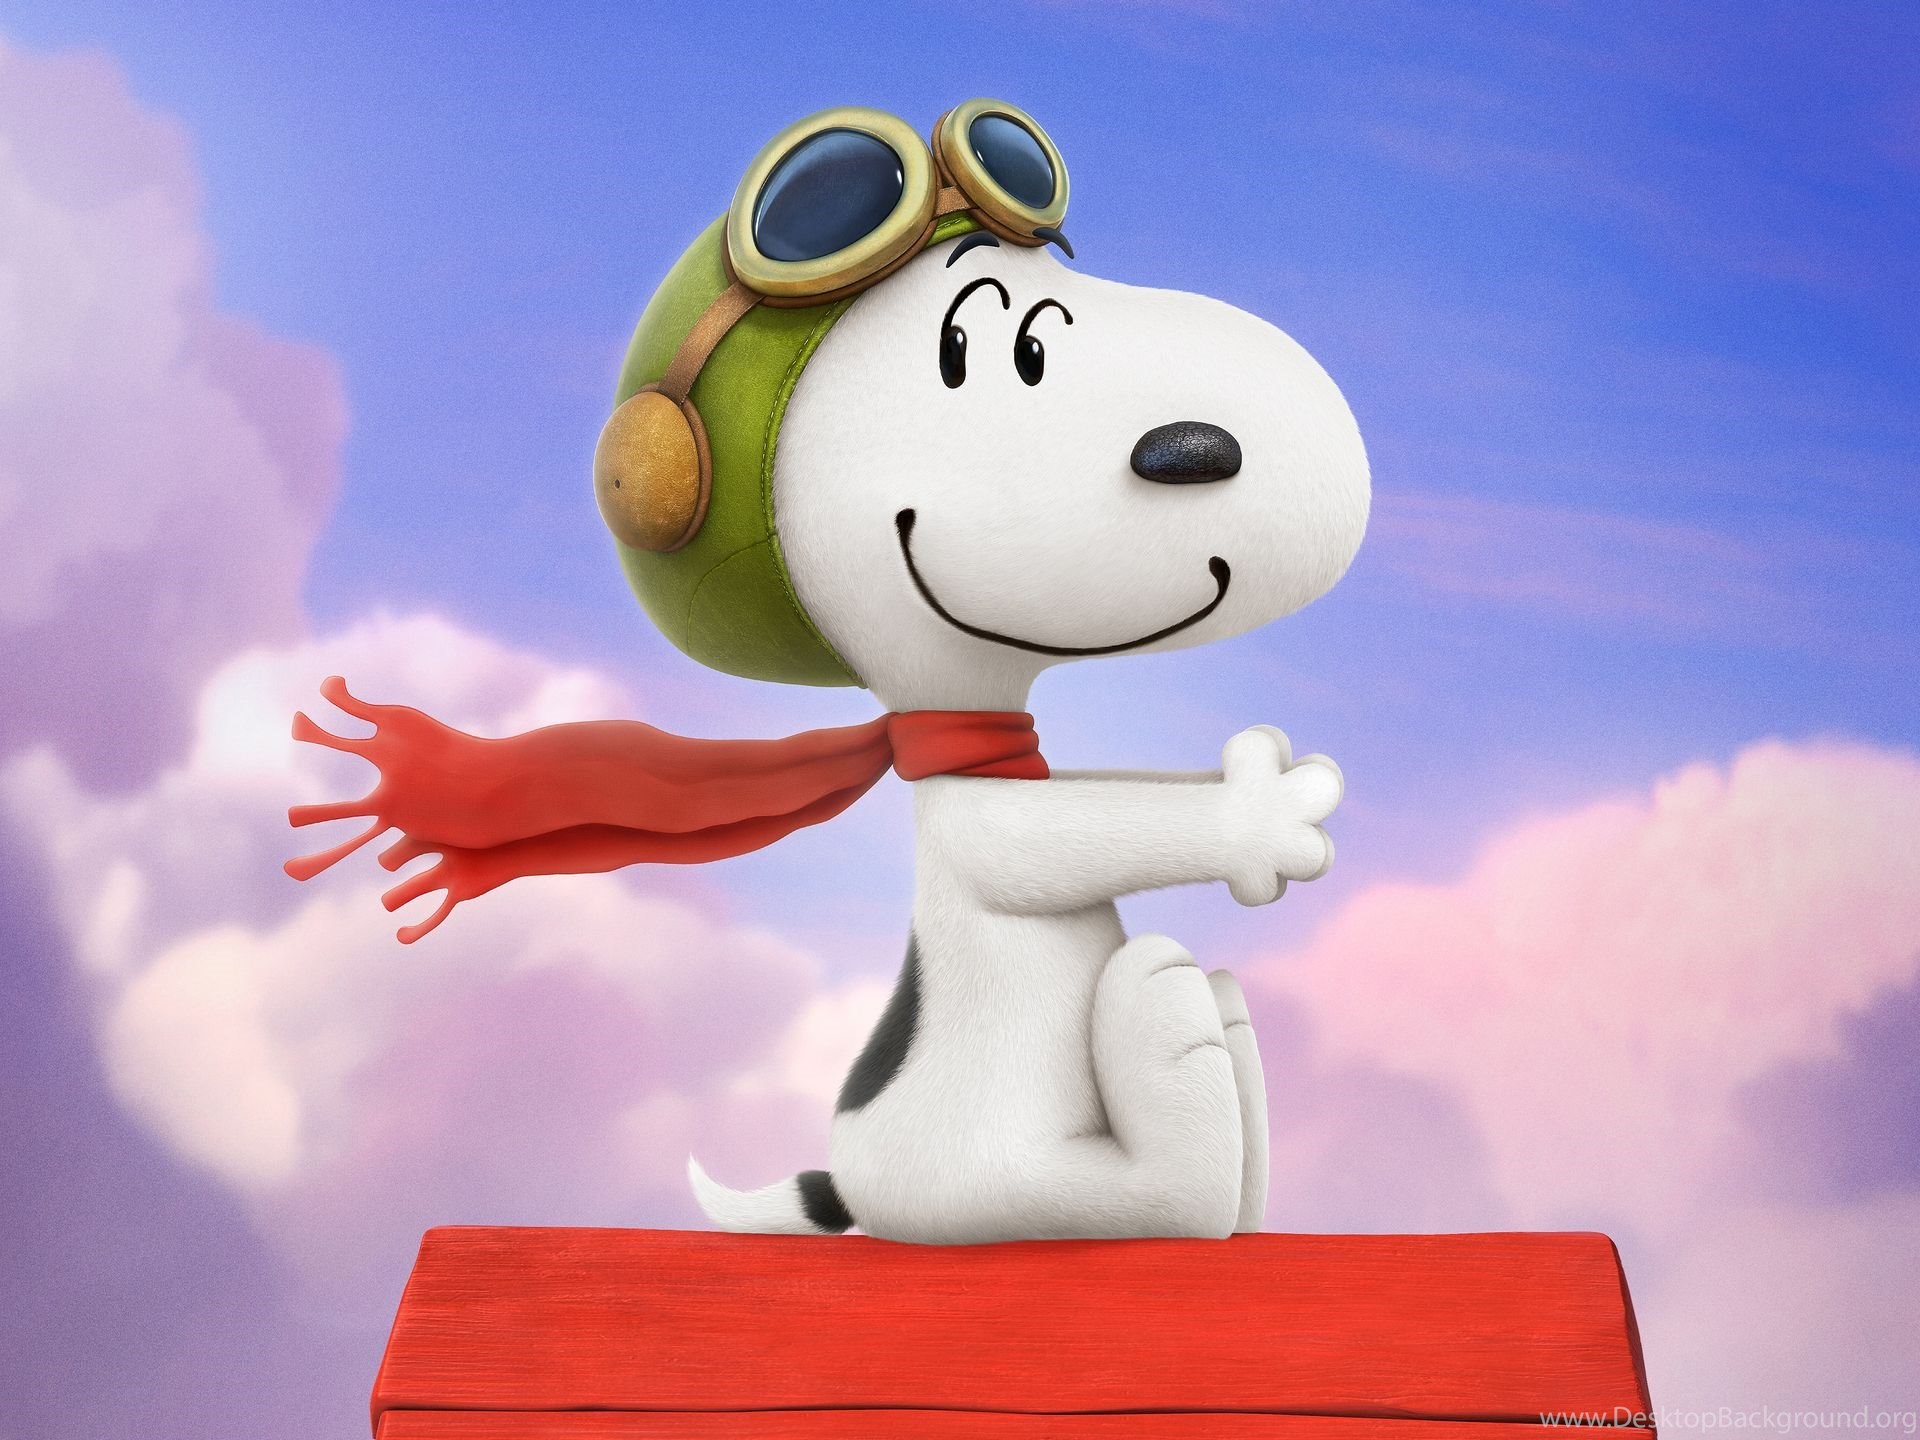 Snoopy Summer Images Wallpapers